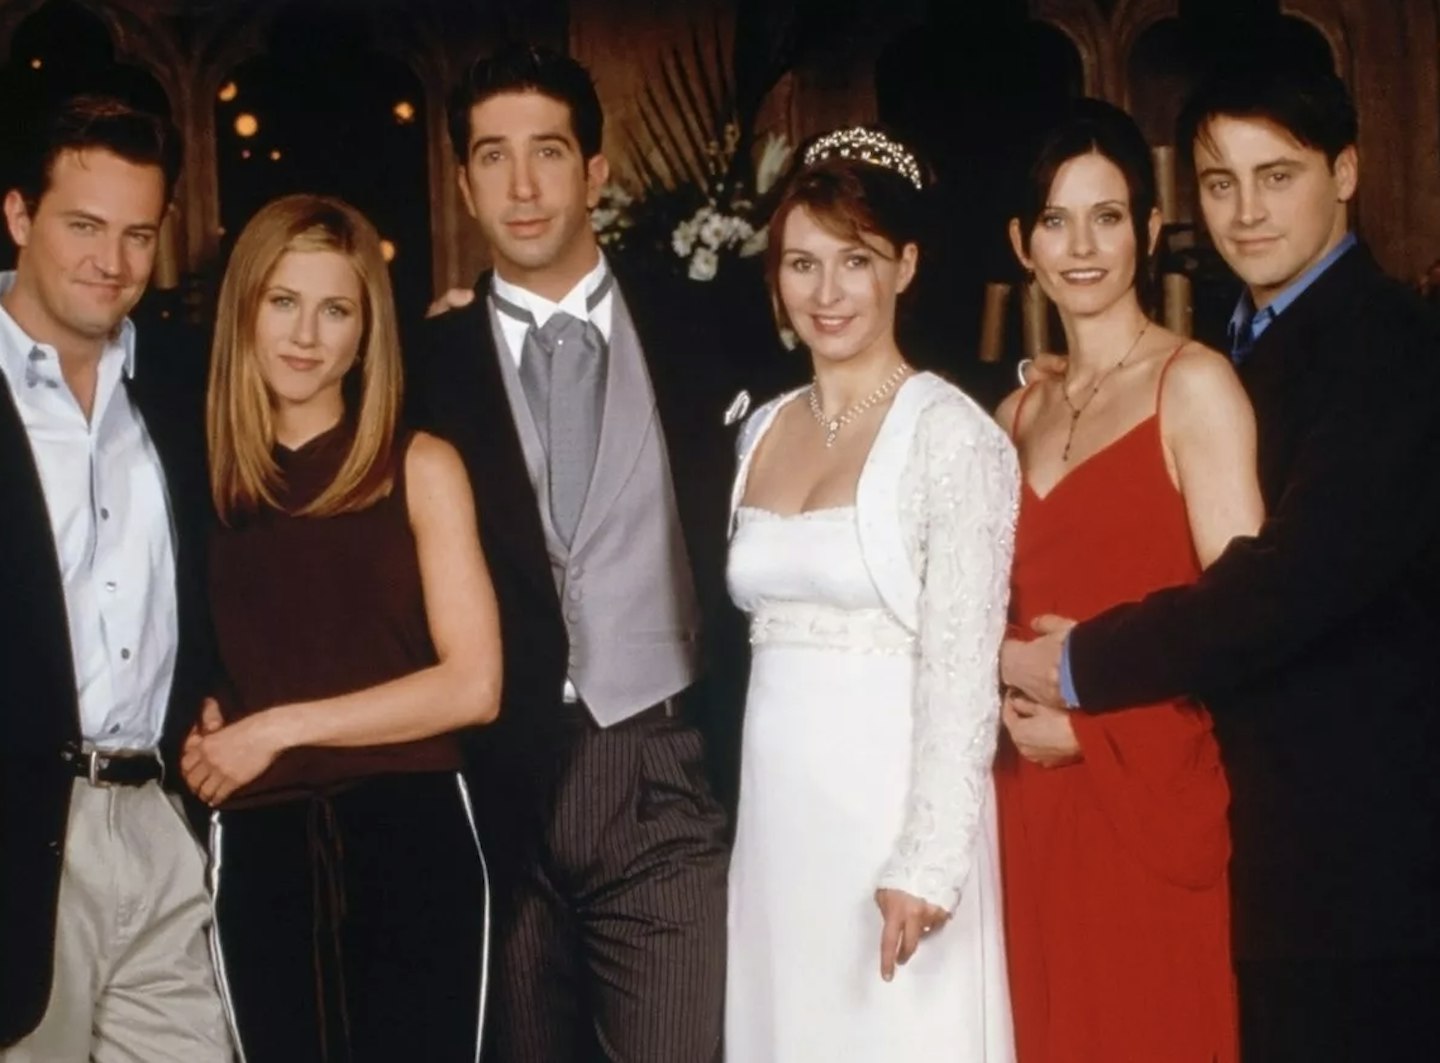 Friends season four finale - the original scripts have been rediscovered